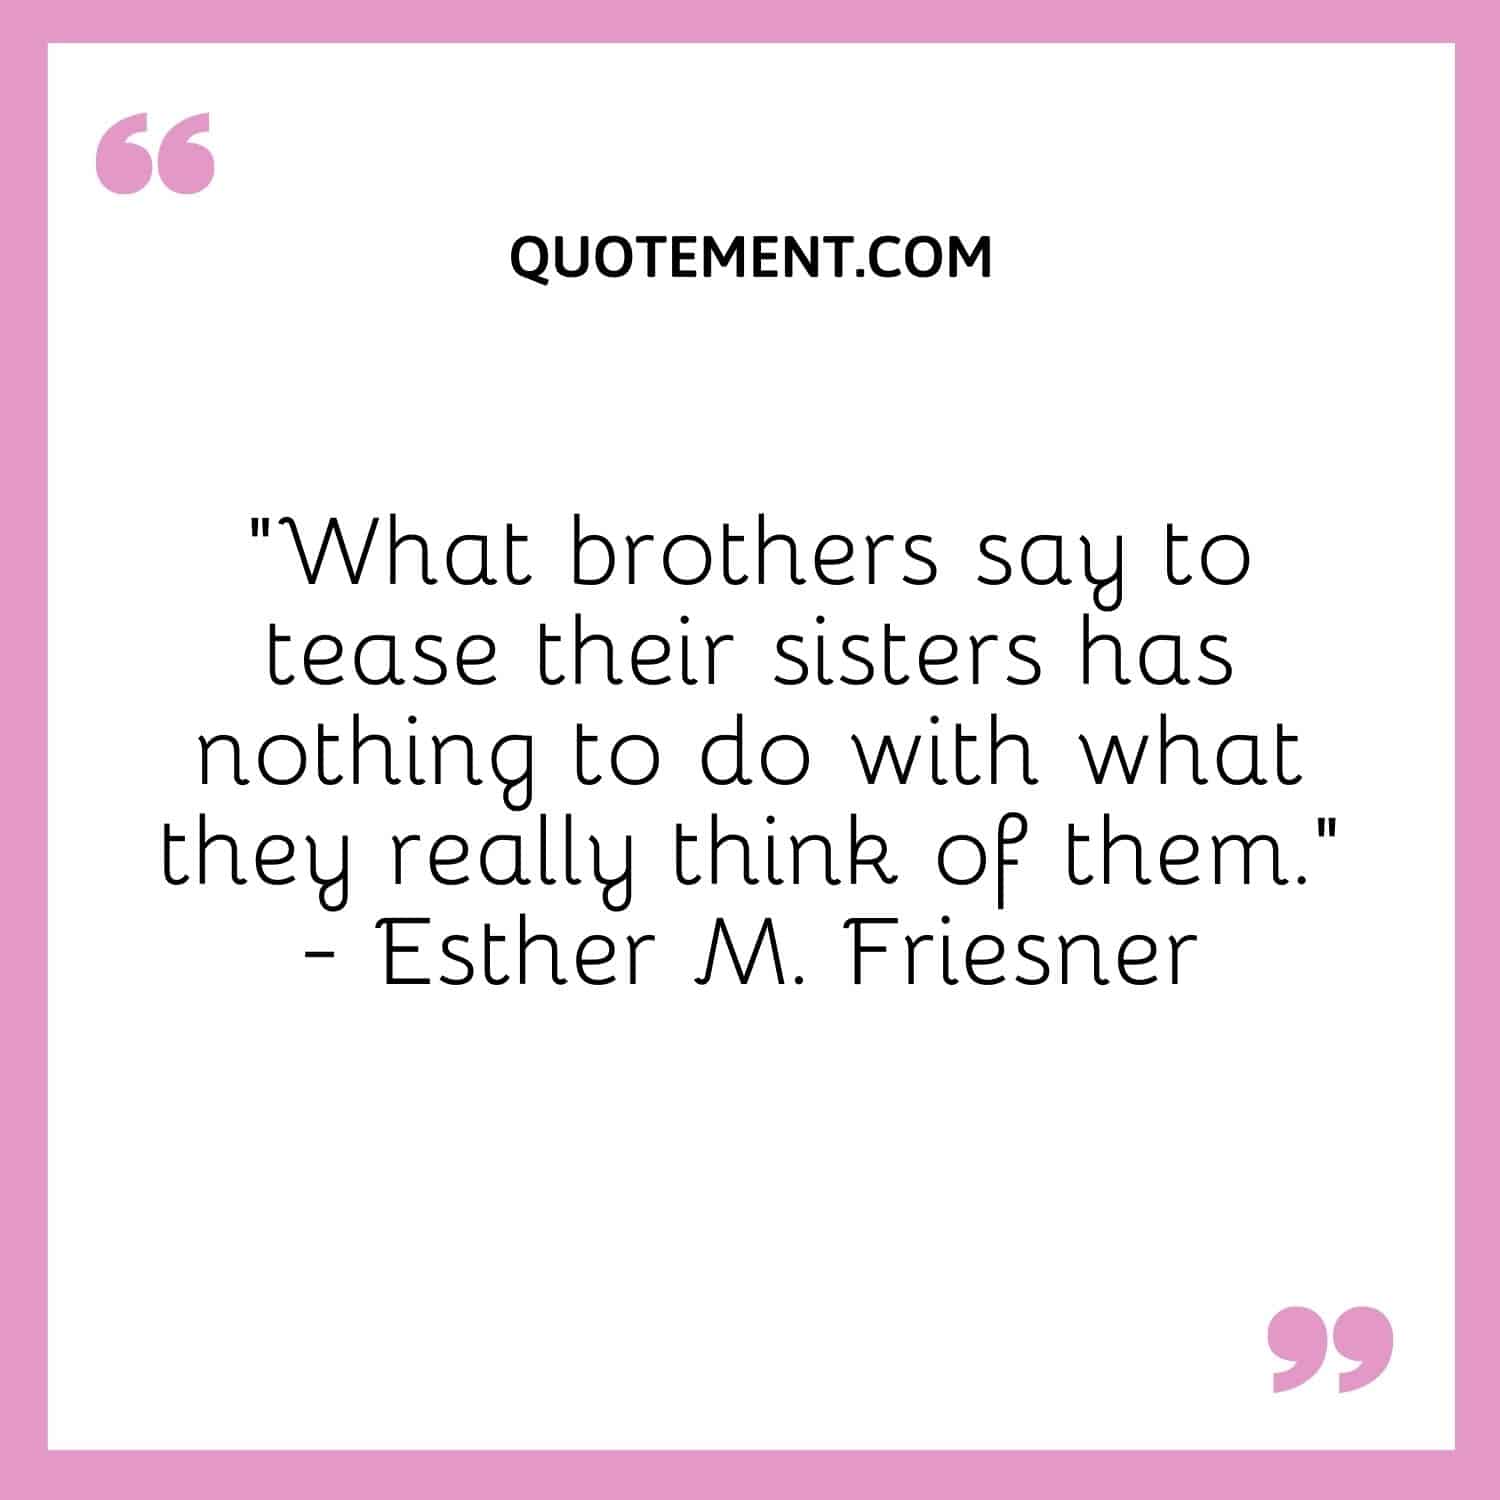 What brothers say to tease their sisters has nothing to do with what they really think of them